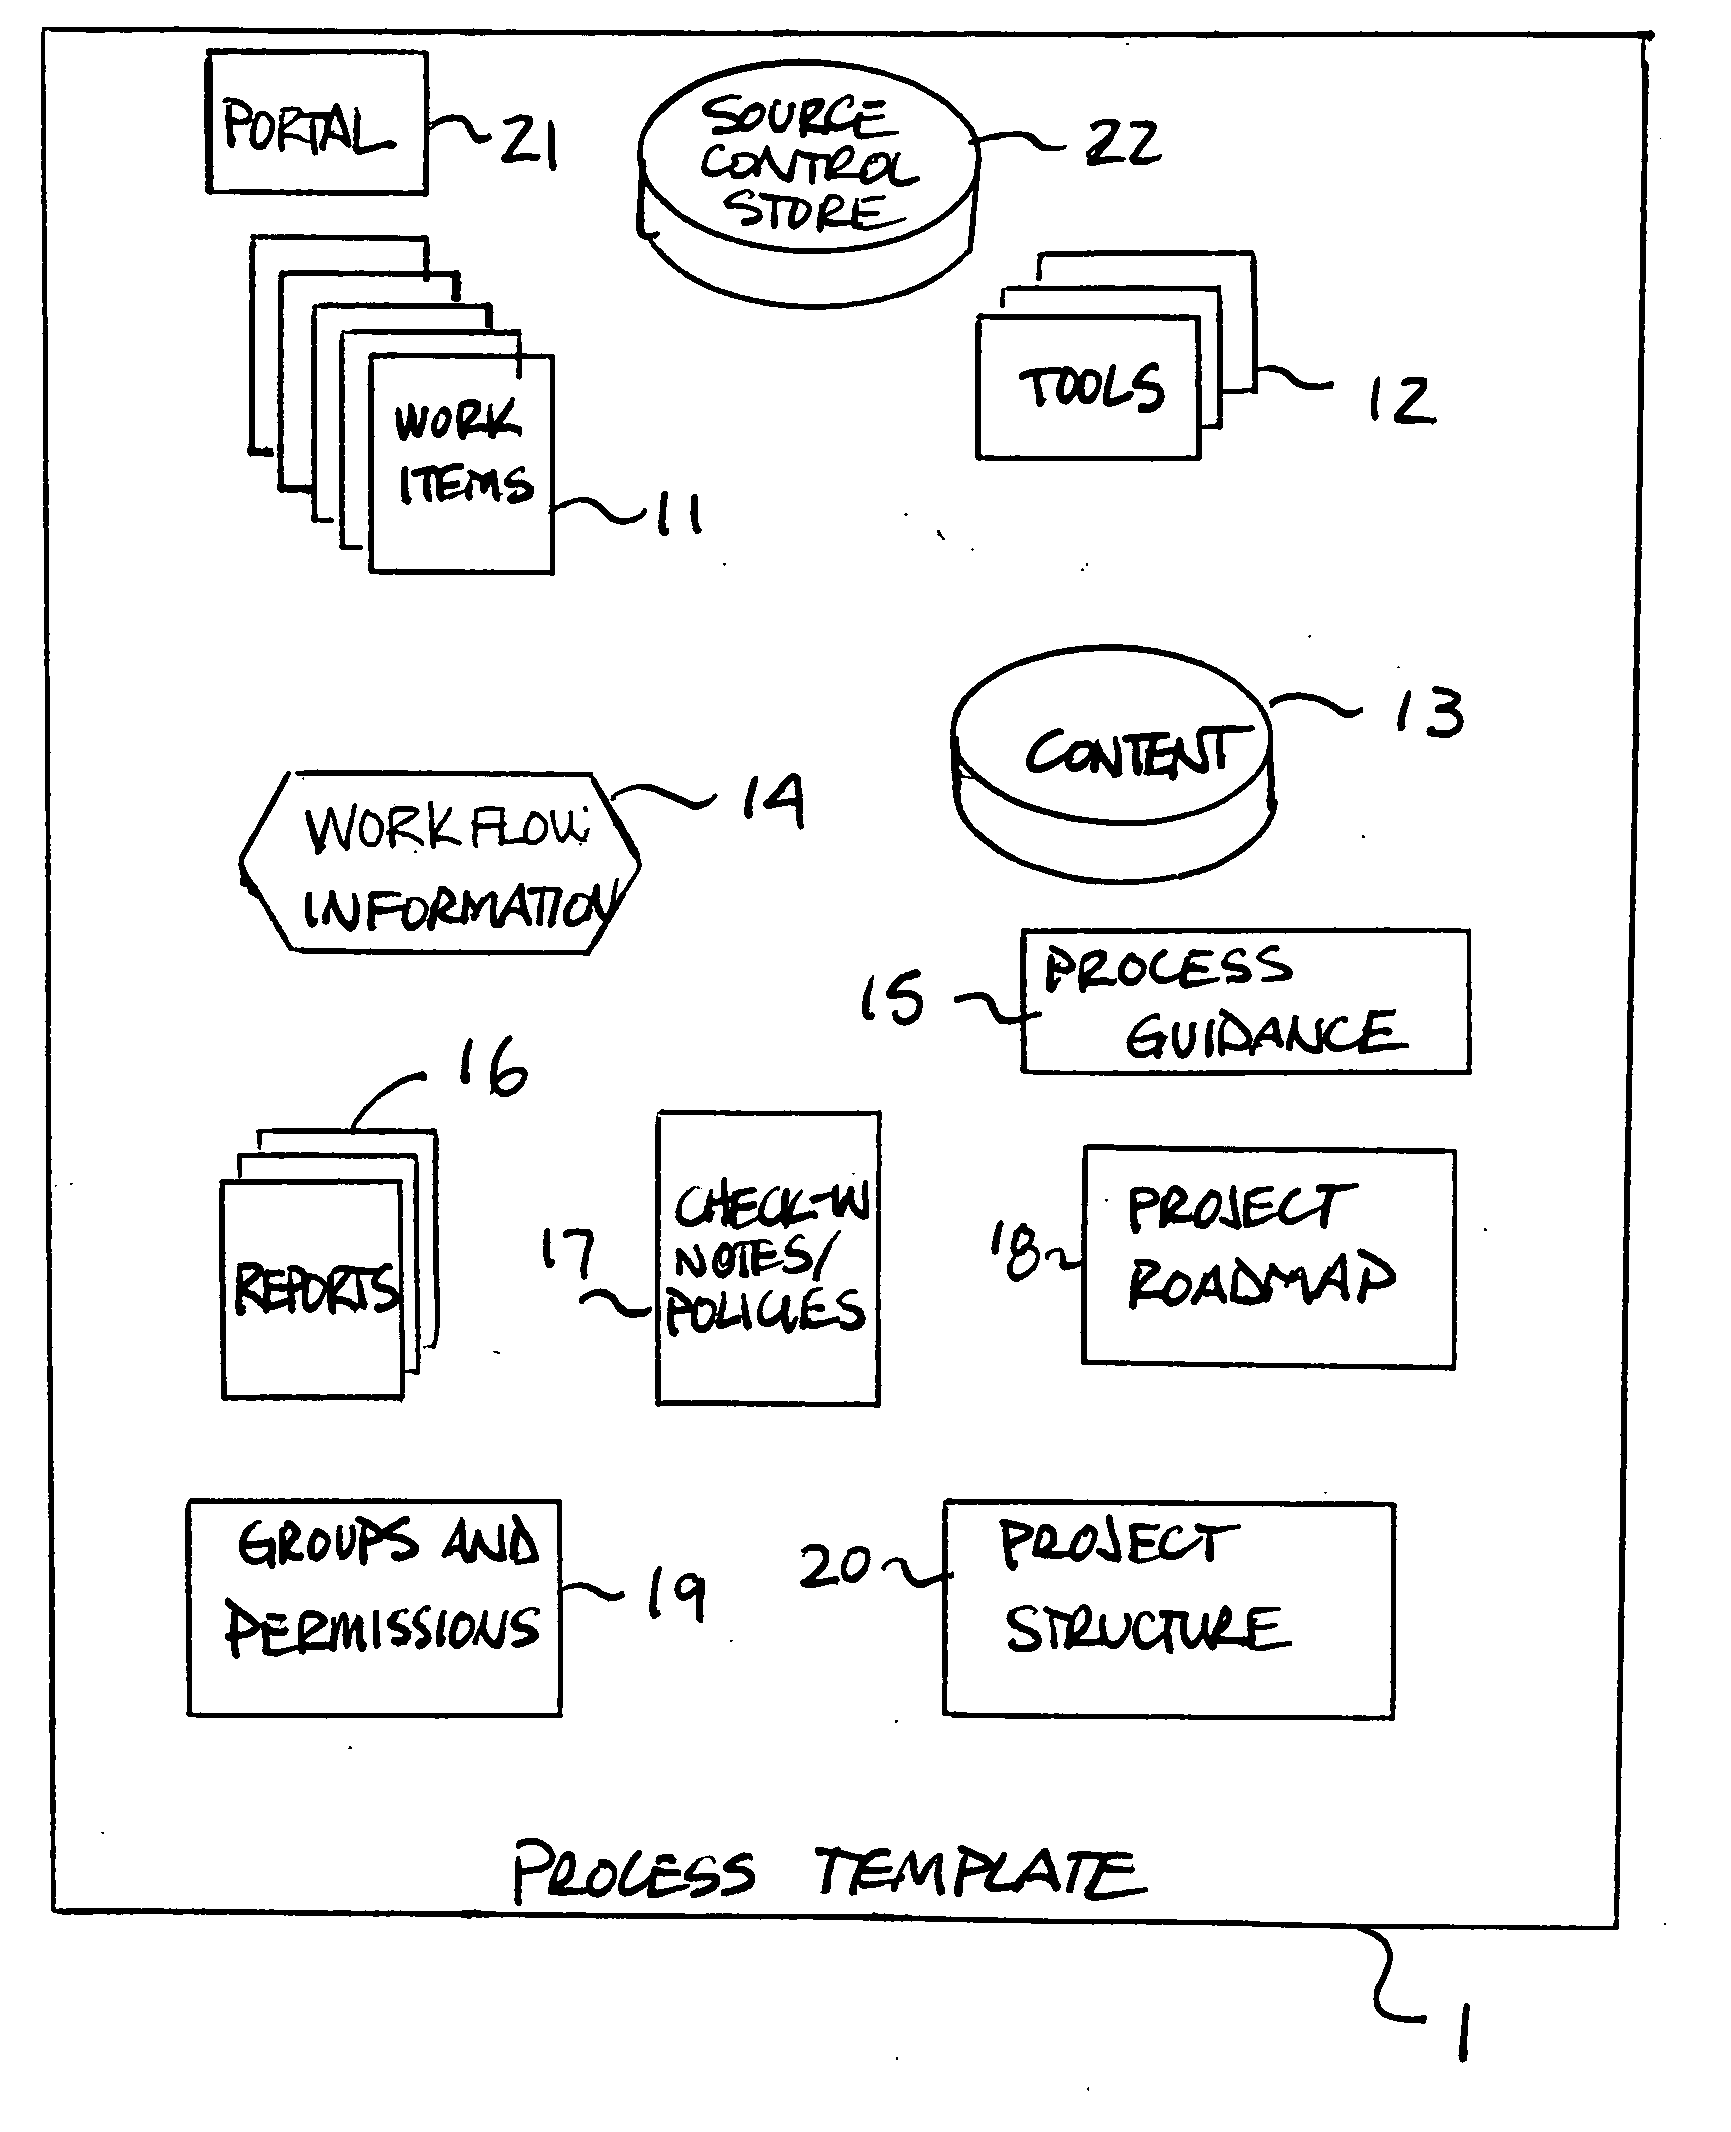 Process templates for software creation